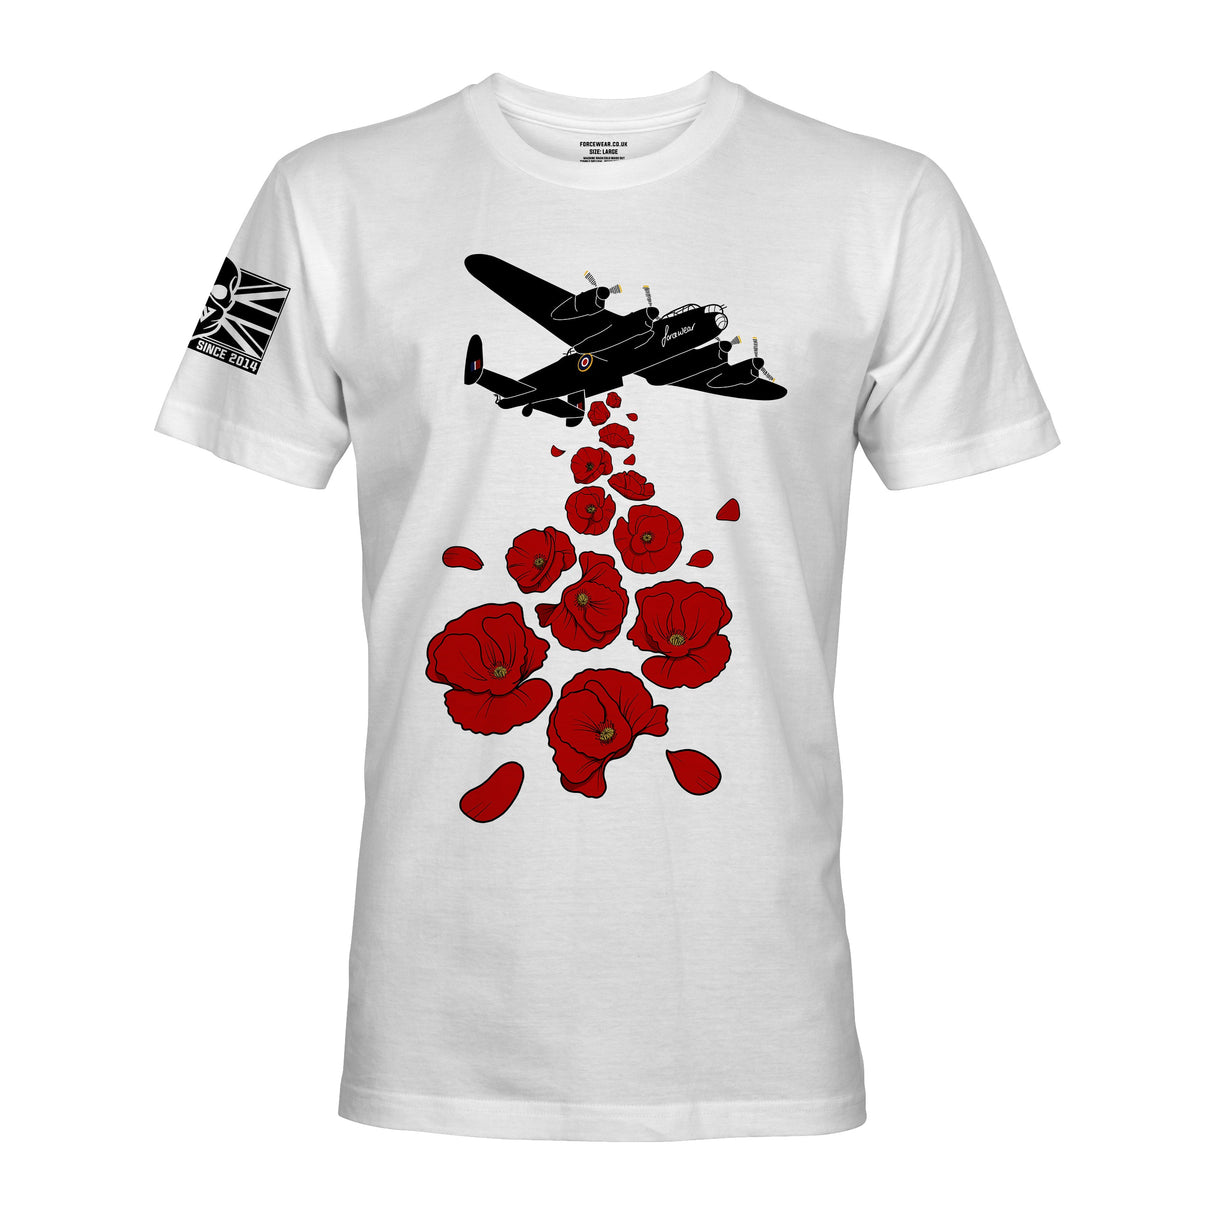 LANCASTER AND POPPIES - Force Wear HQ - T-SHIRTS